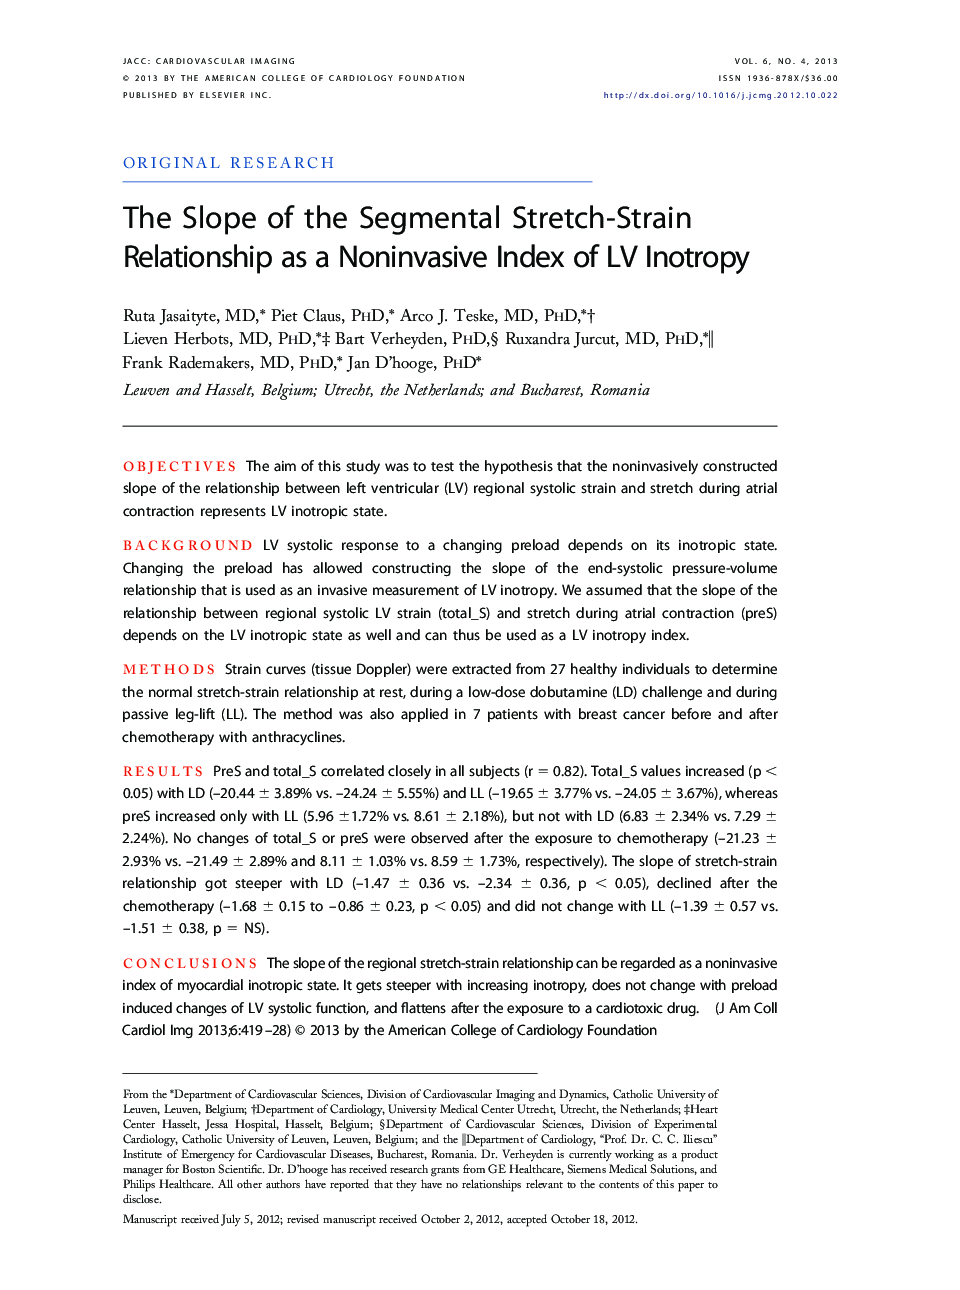 The Slope of the Segmental Stretch-Strain Relationship as a Noninvasive Index of LV Inotropy 